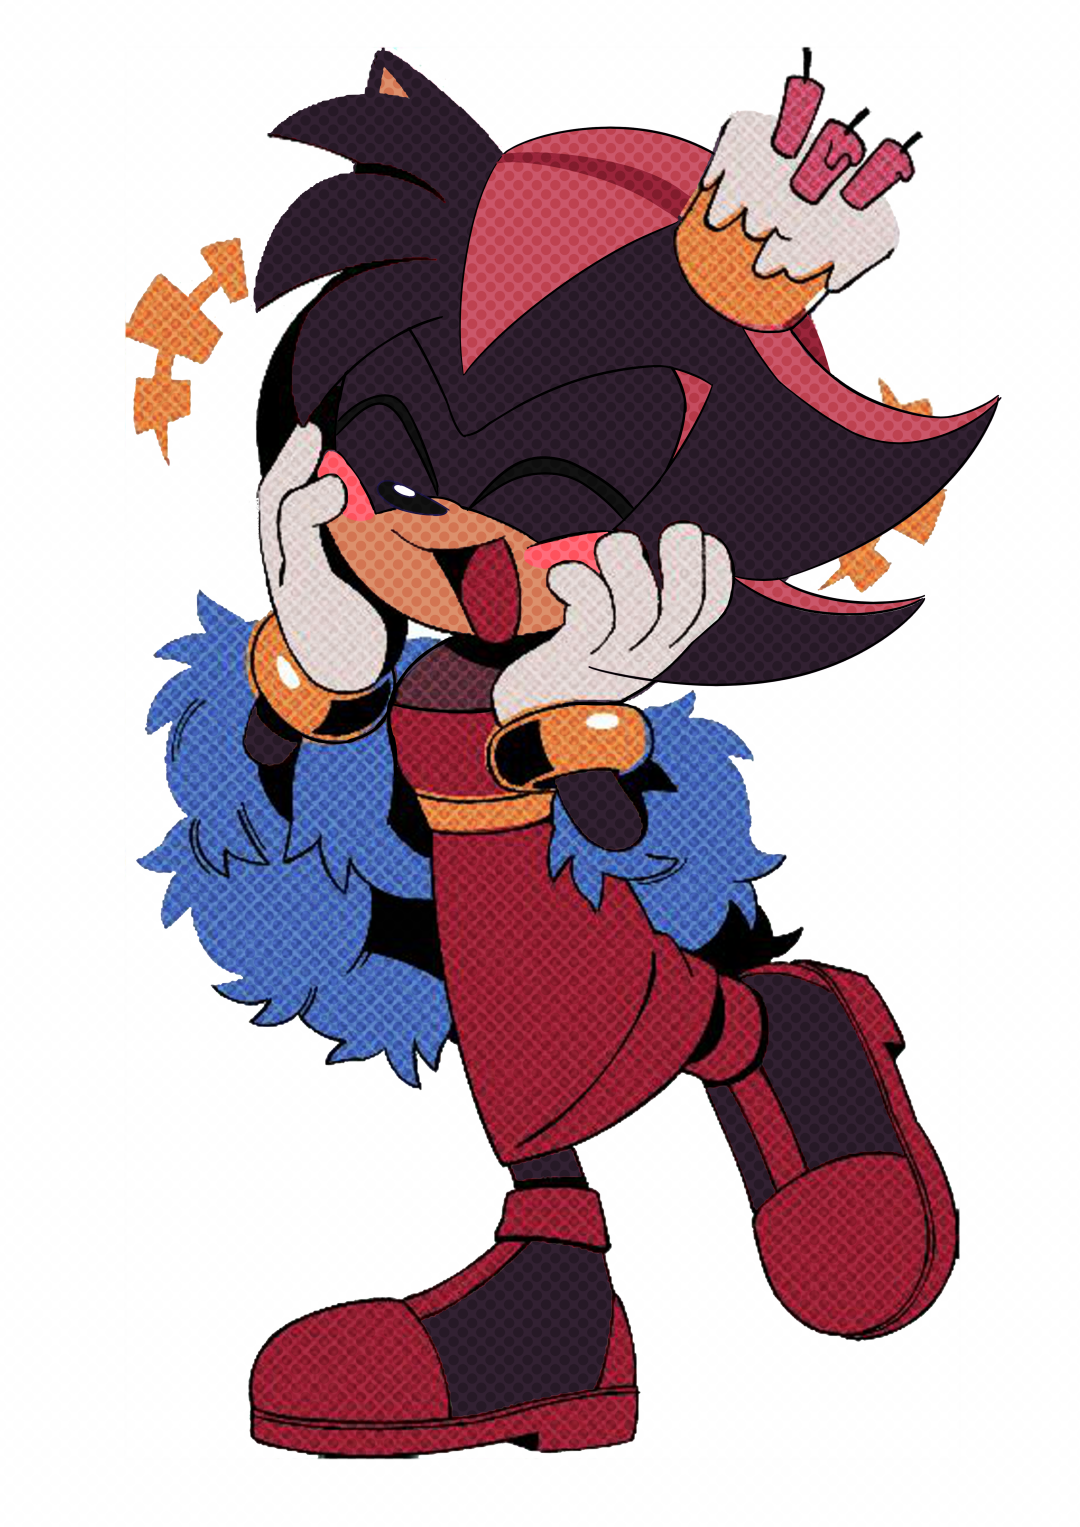 Cursed personality swap between Shadow and Amy by Wizaria : r